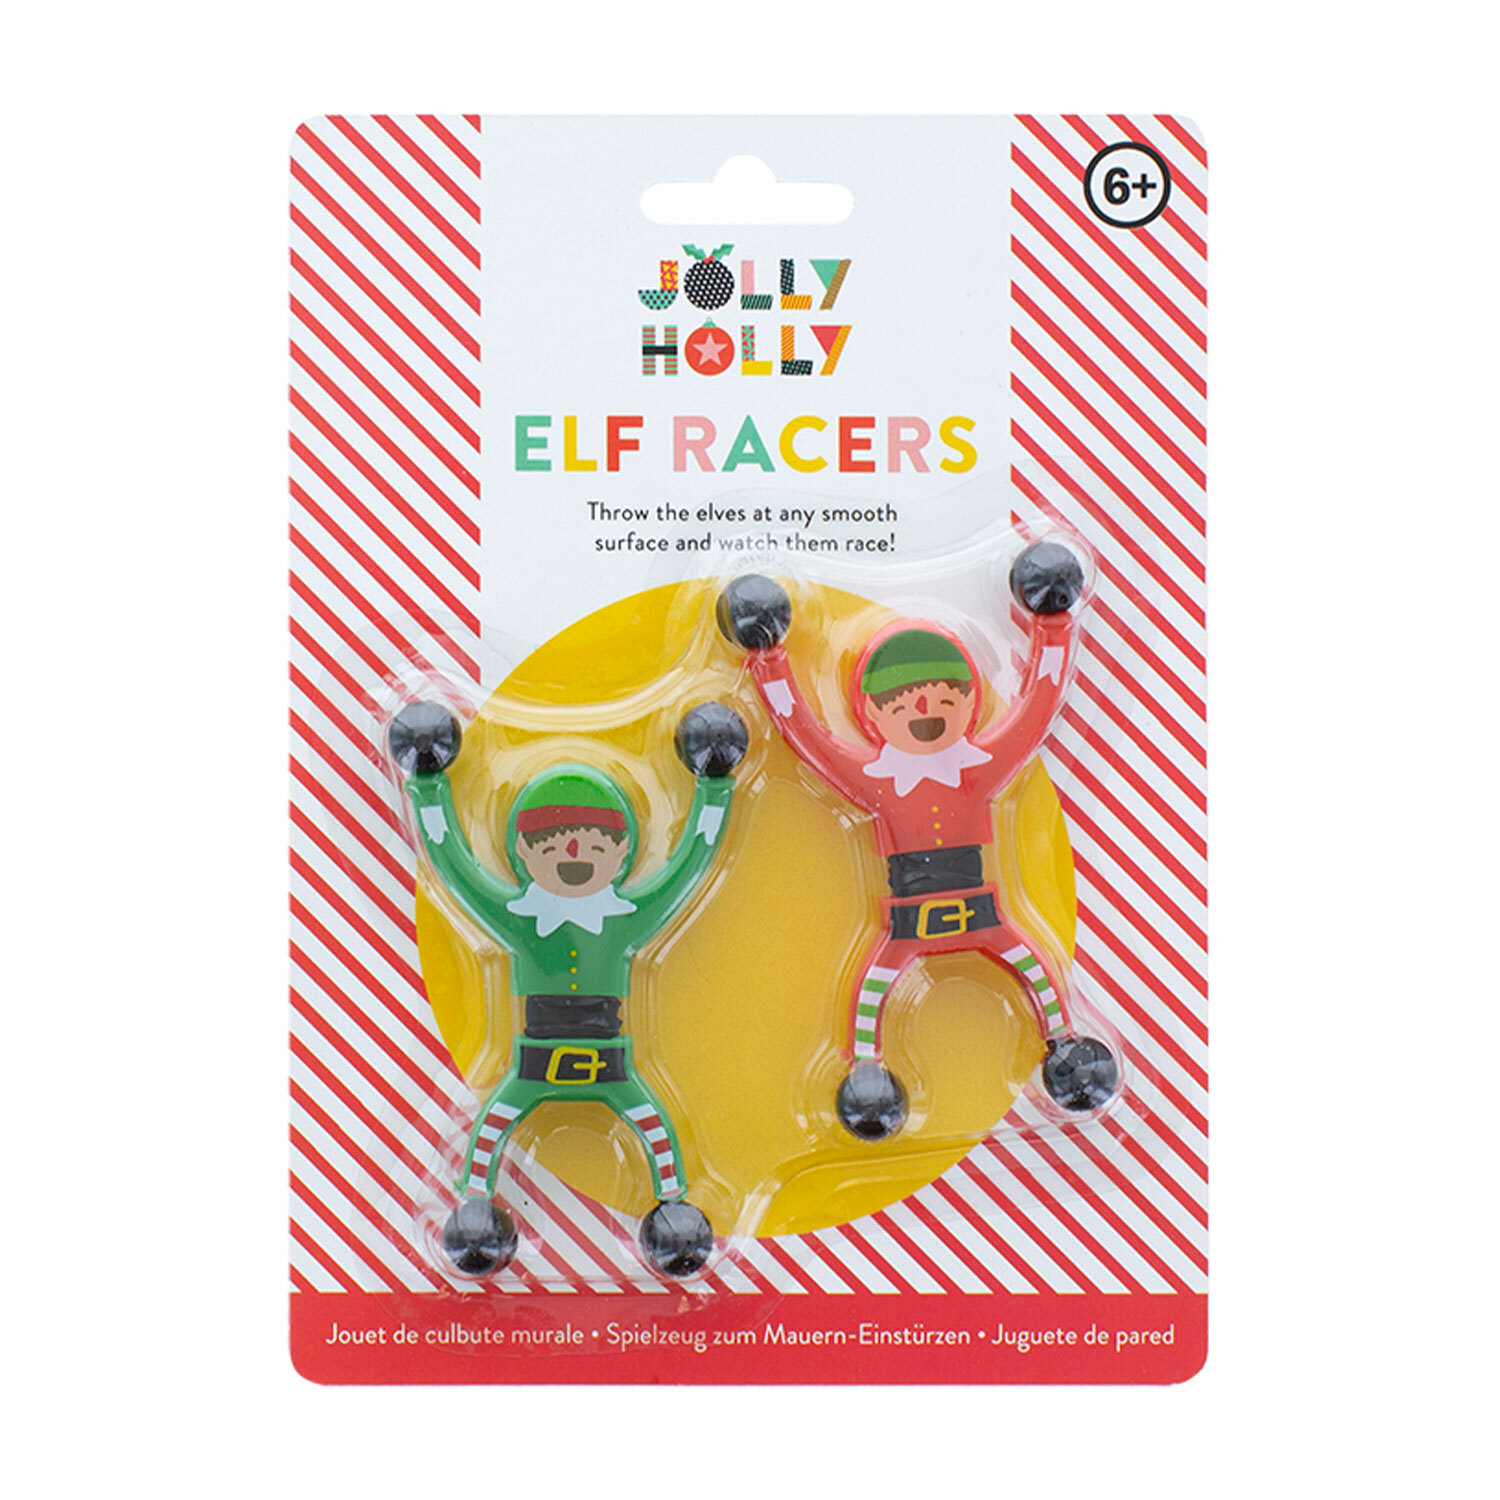 G&G Jolly Holly Elf Racers Toy Image 1